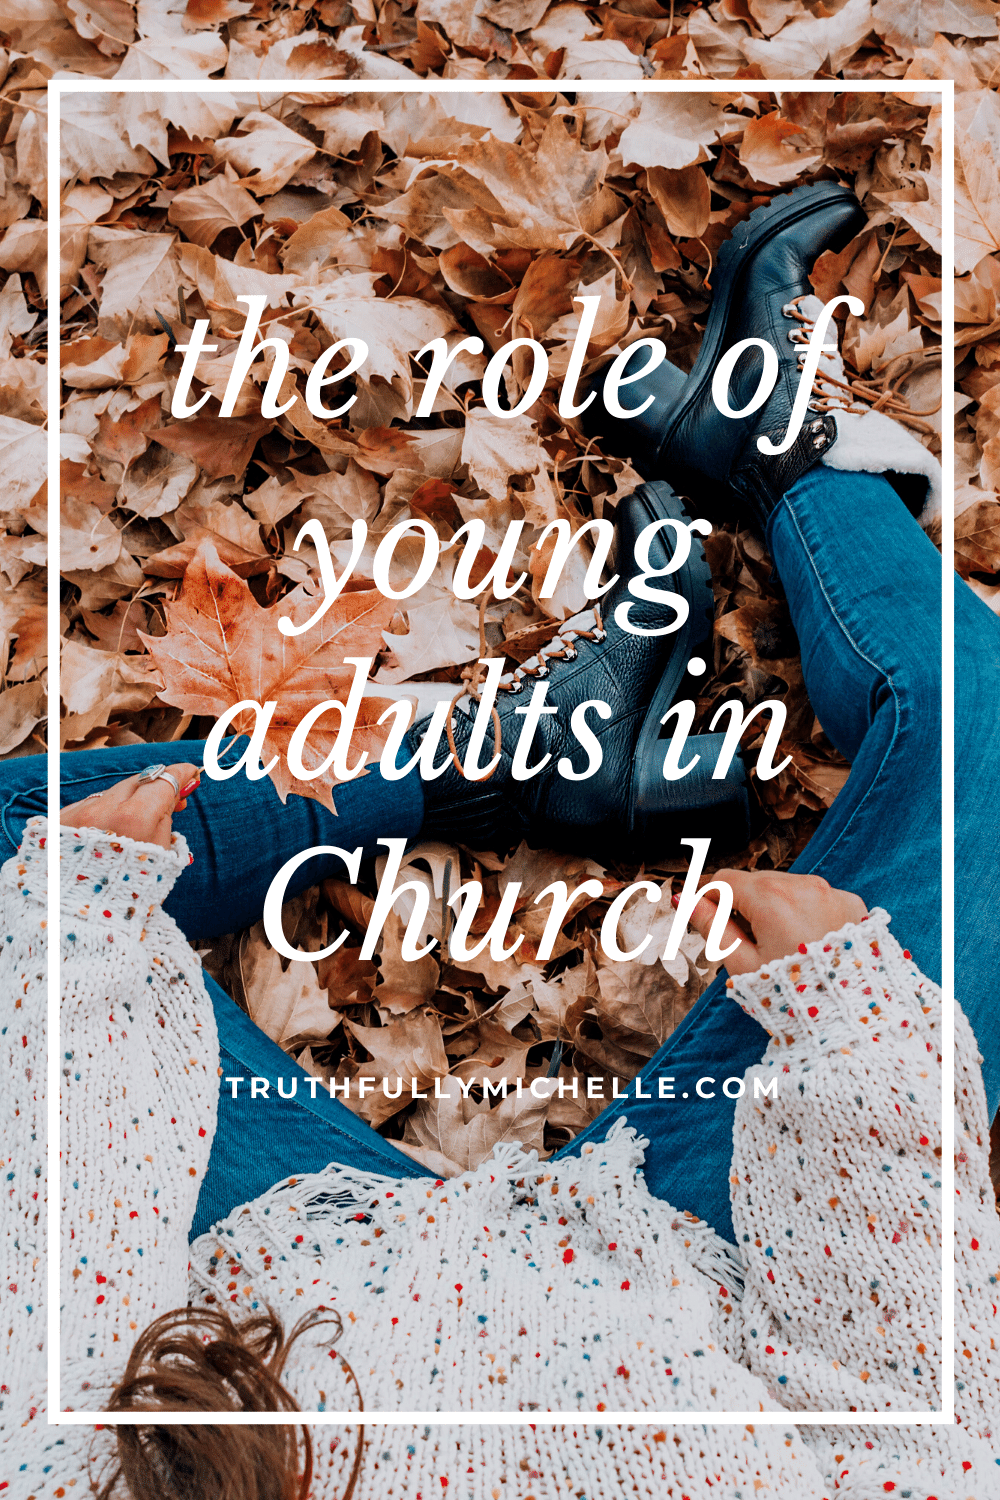 young adult ministry, young adult christians, christian young adults, vision for young adults ministry, young adults in church